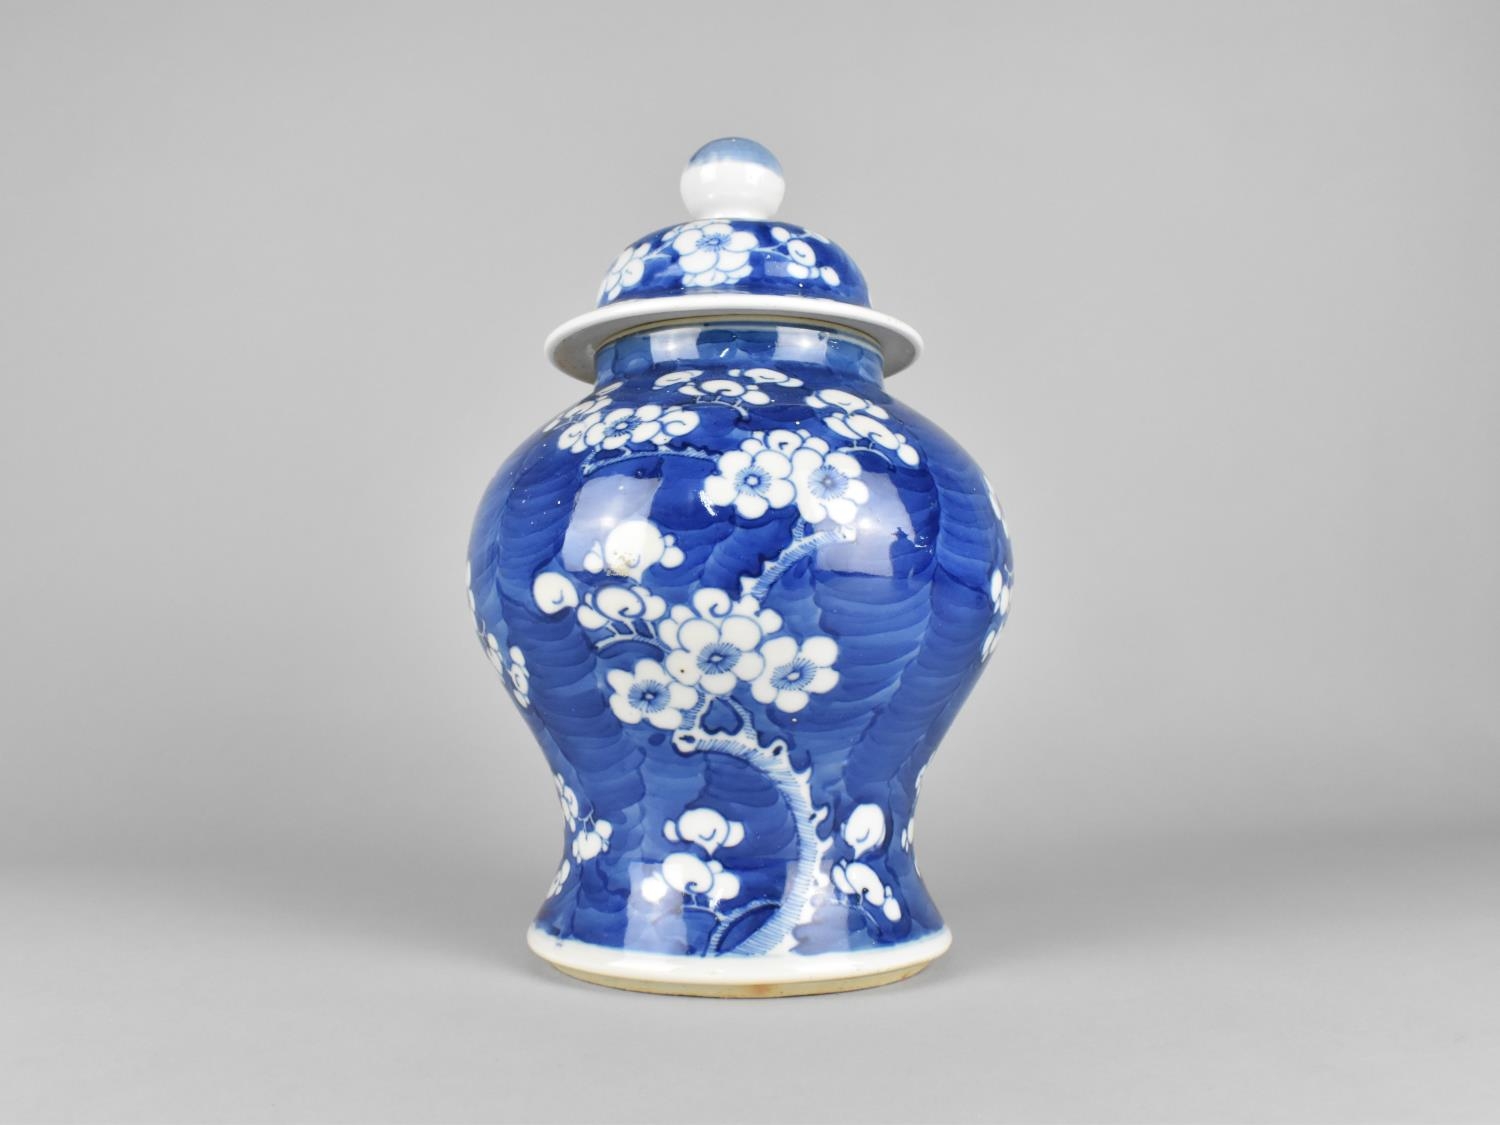 A Chinese Late Qing Dynasty Porcelain Blue and White Prunus Pattern Jar and Cover, Four Character